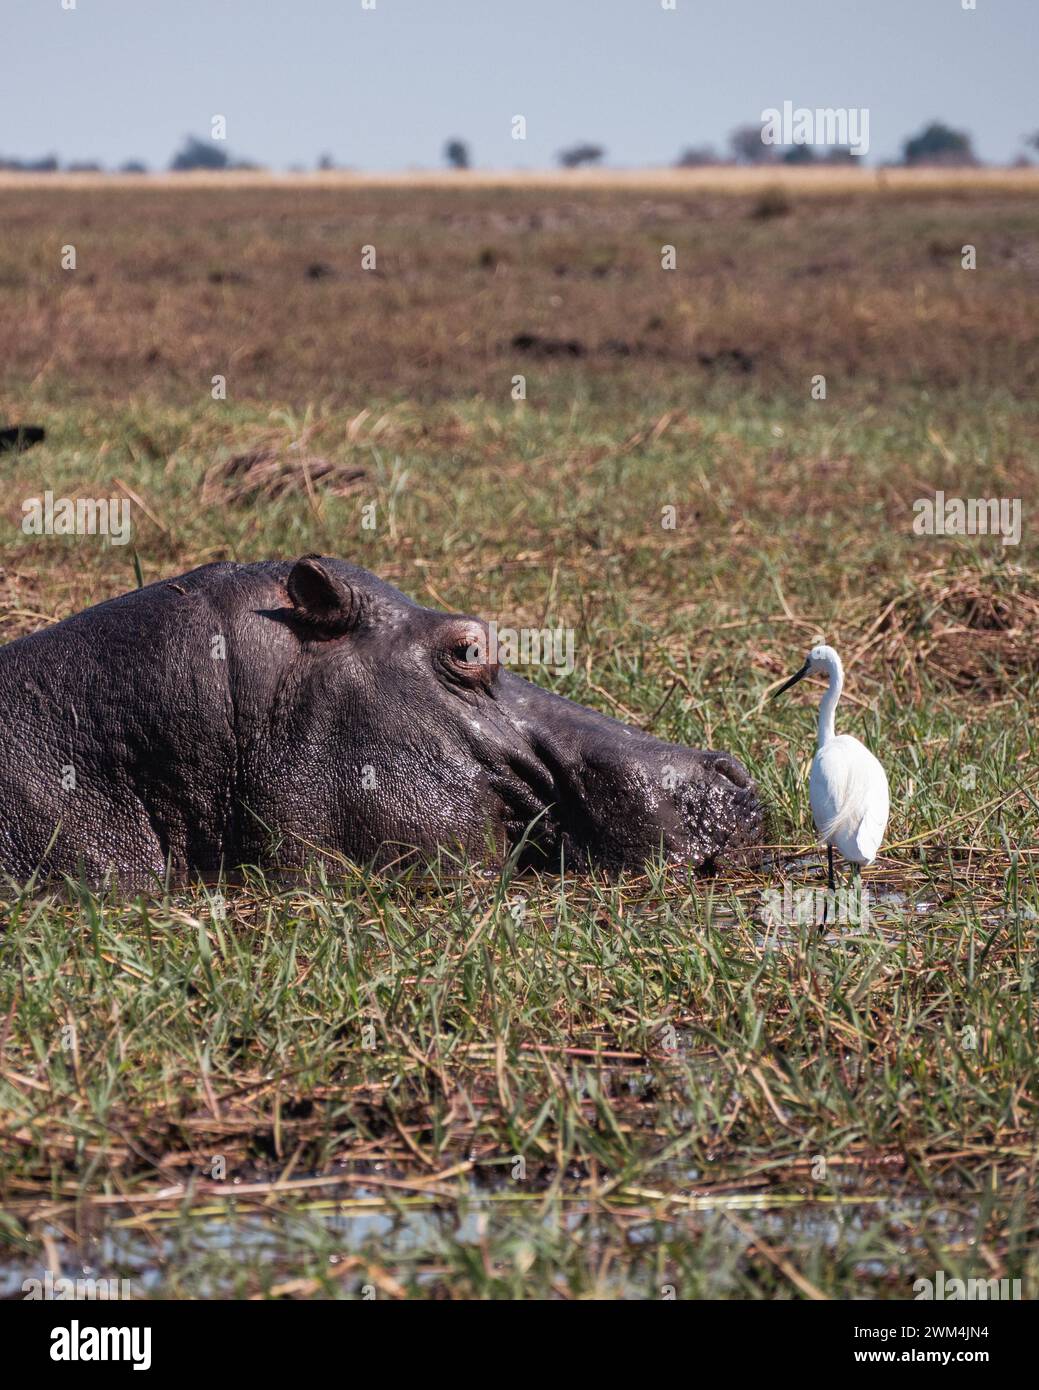 A hippopotamus resting in the swamp, with an egret perched nearby Stock Photo